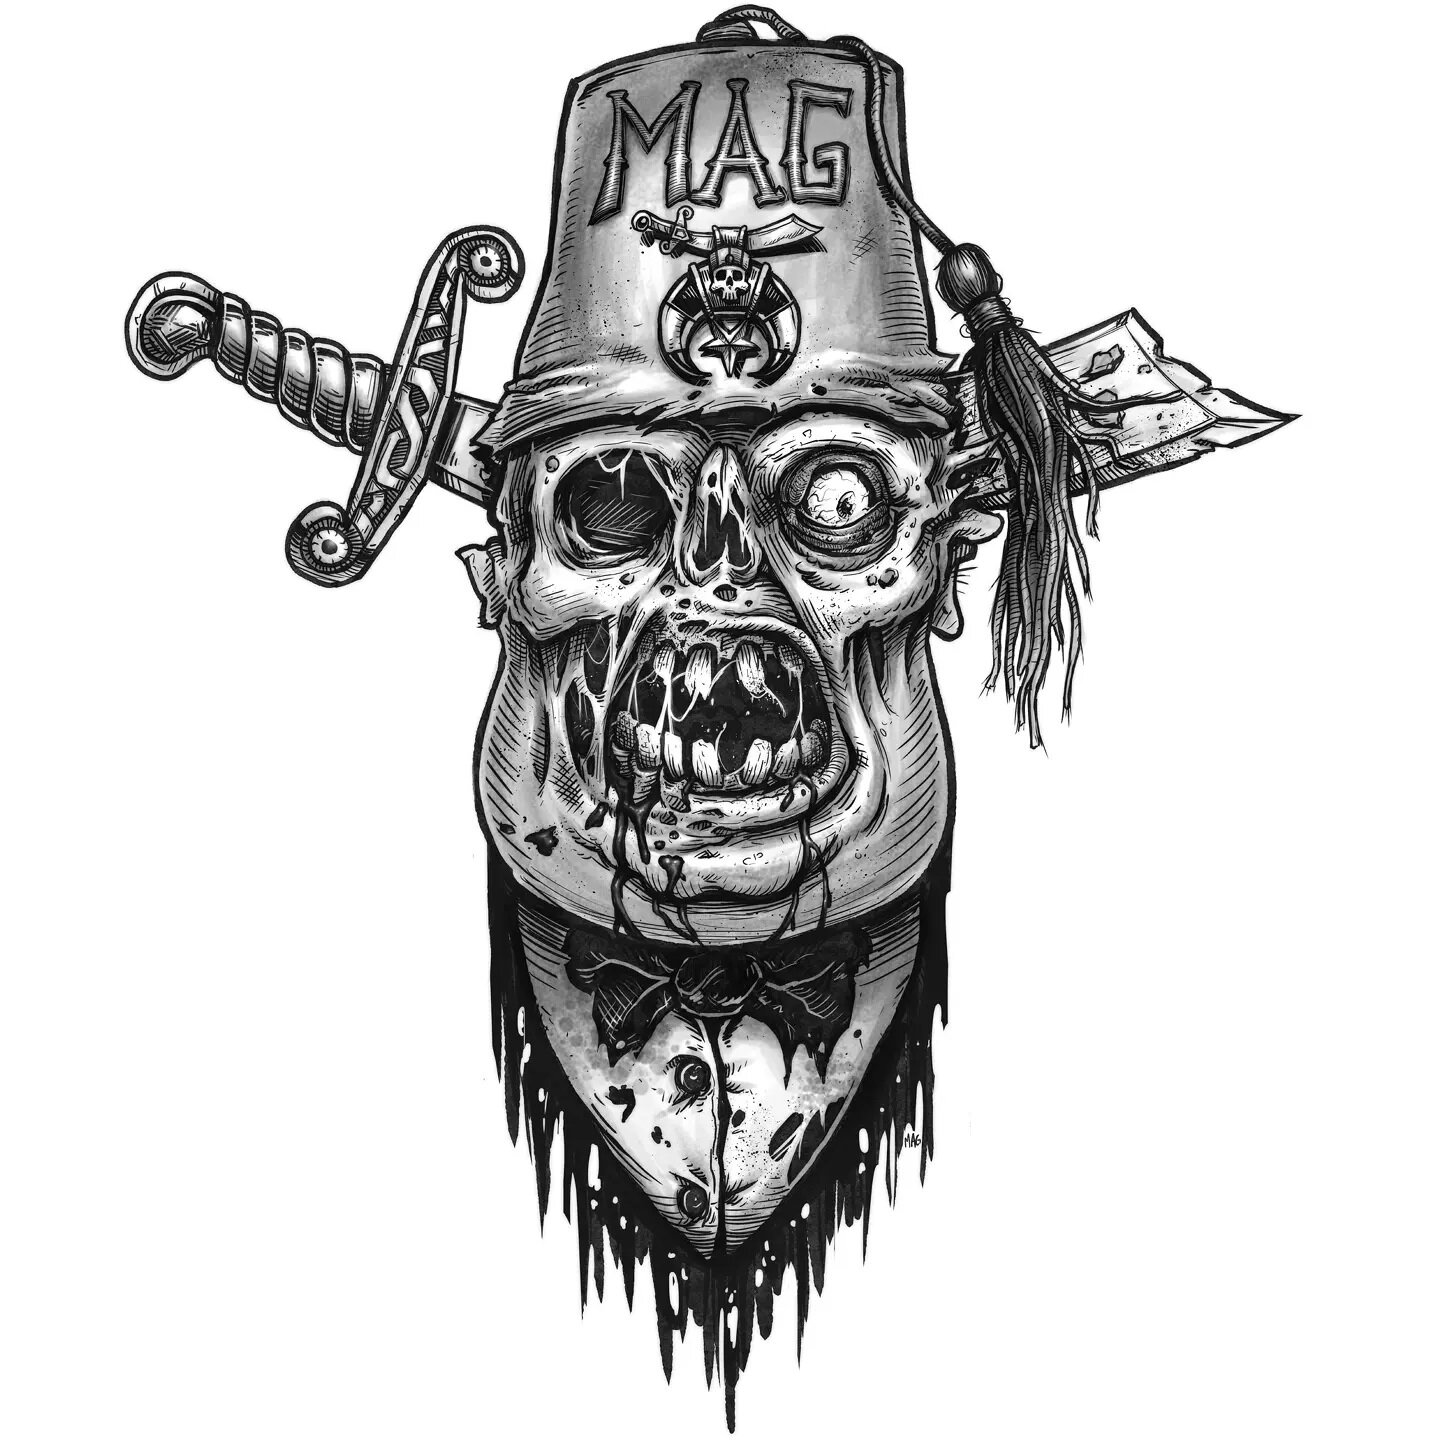 been sketching zombie shriners lately for some reason. here's one now!
#artnowsleeplater #horror #darkart #tattoo #shriners #zombie